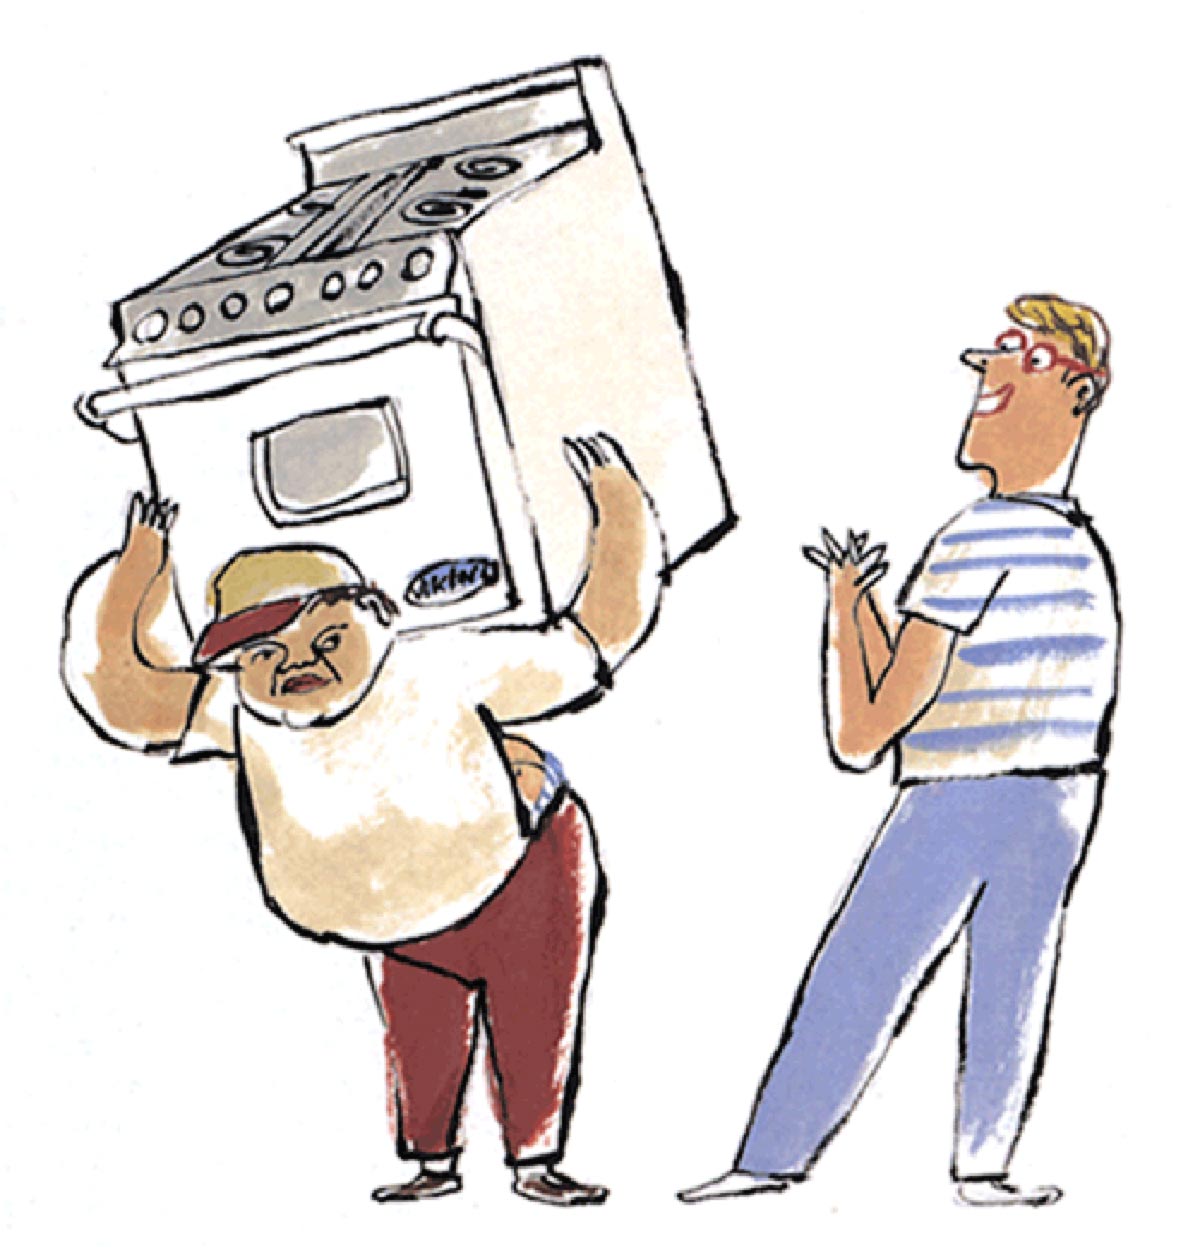 An illustration of a workman with a stove on his back; a man standing beside him applauding.